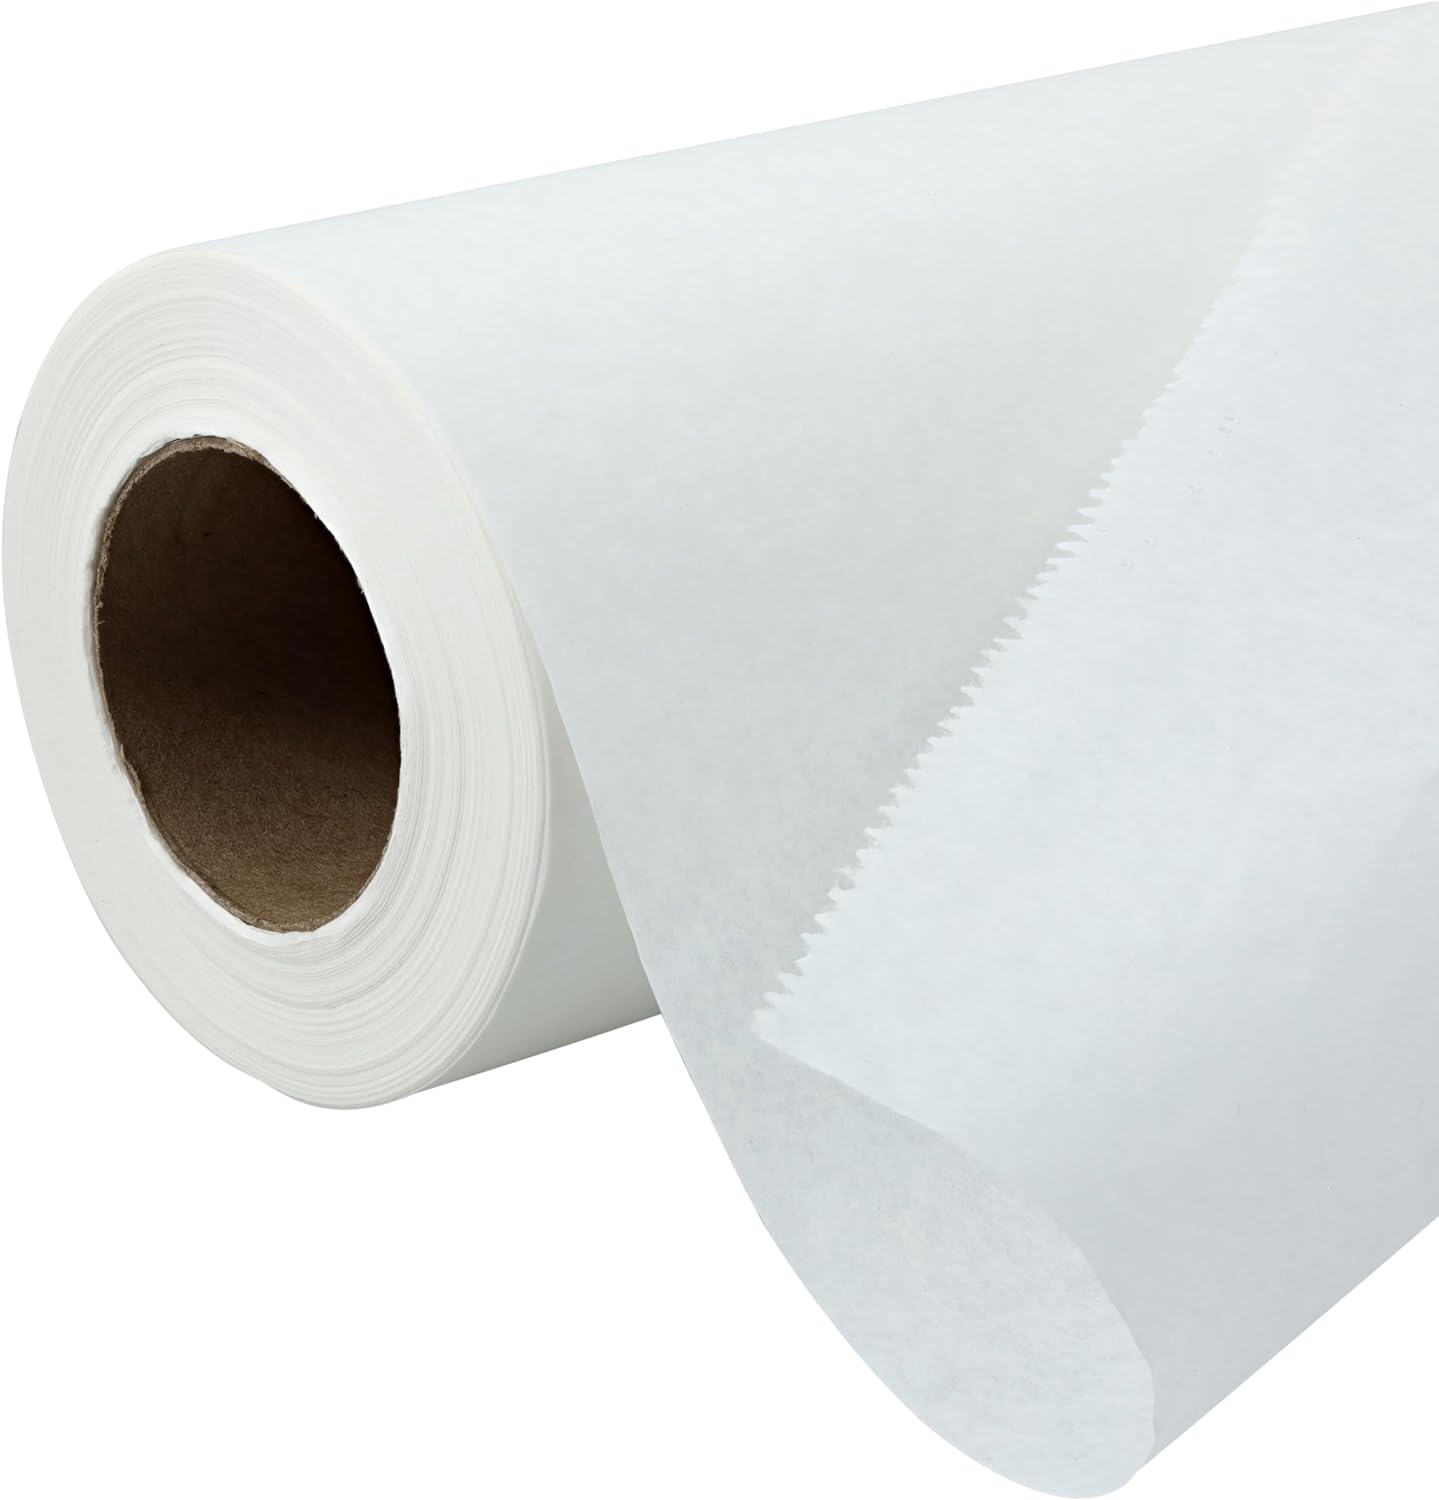 Henry Schein Exam Table Paper Smooth White Smooth Disposable Paper Roll for Patient Protection